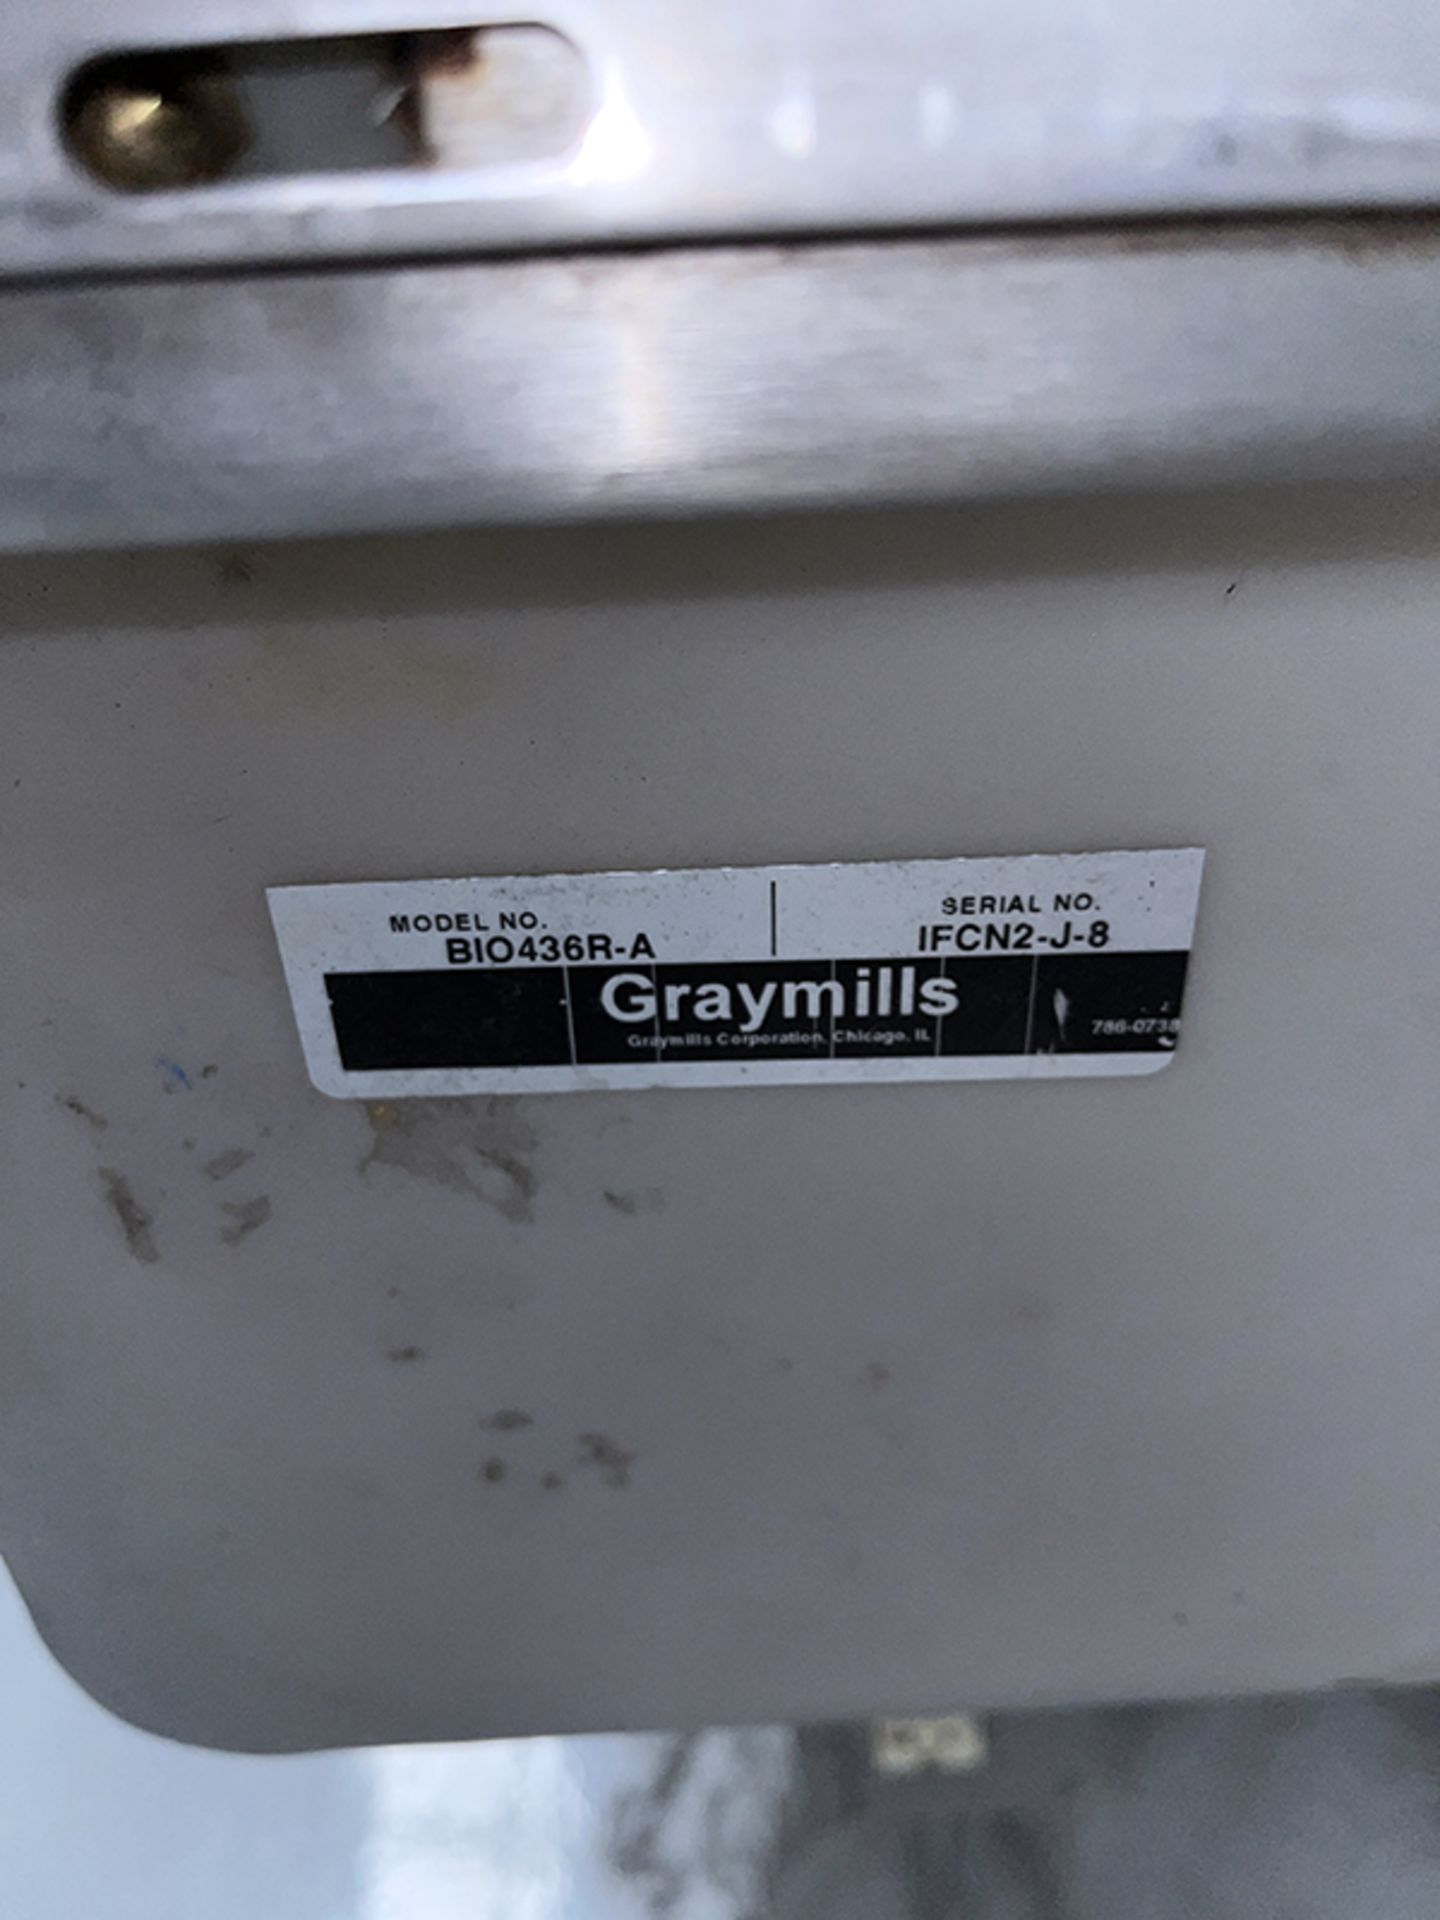 Graymills Biomatic Parts Washer - Image 4 of 6